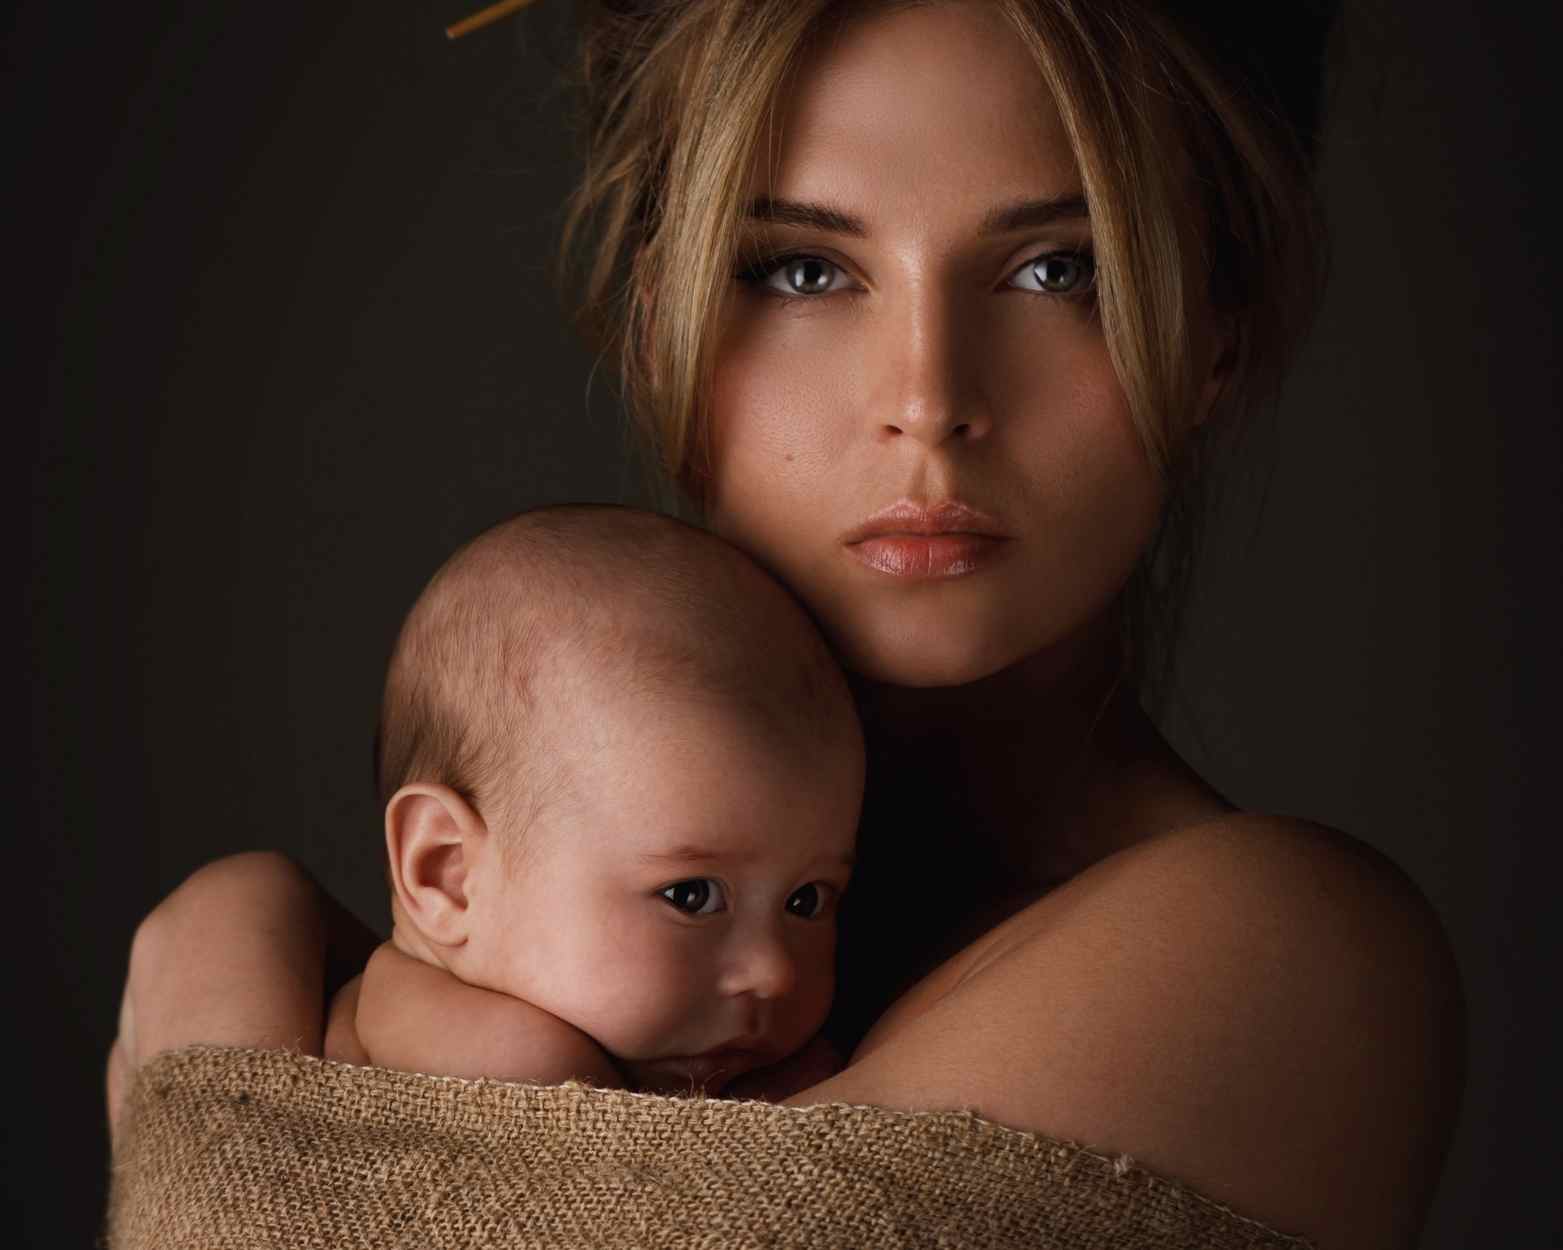 A postpartum woman dealing with her postpartum hormones and holding her newborn baby.